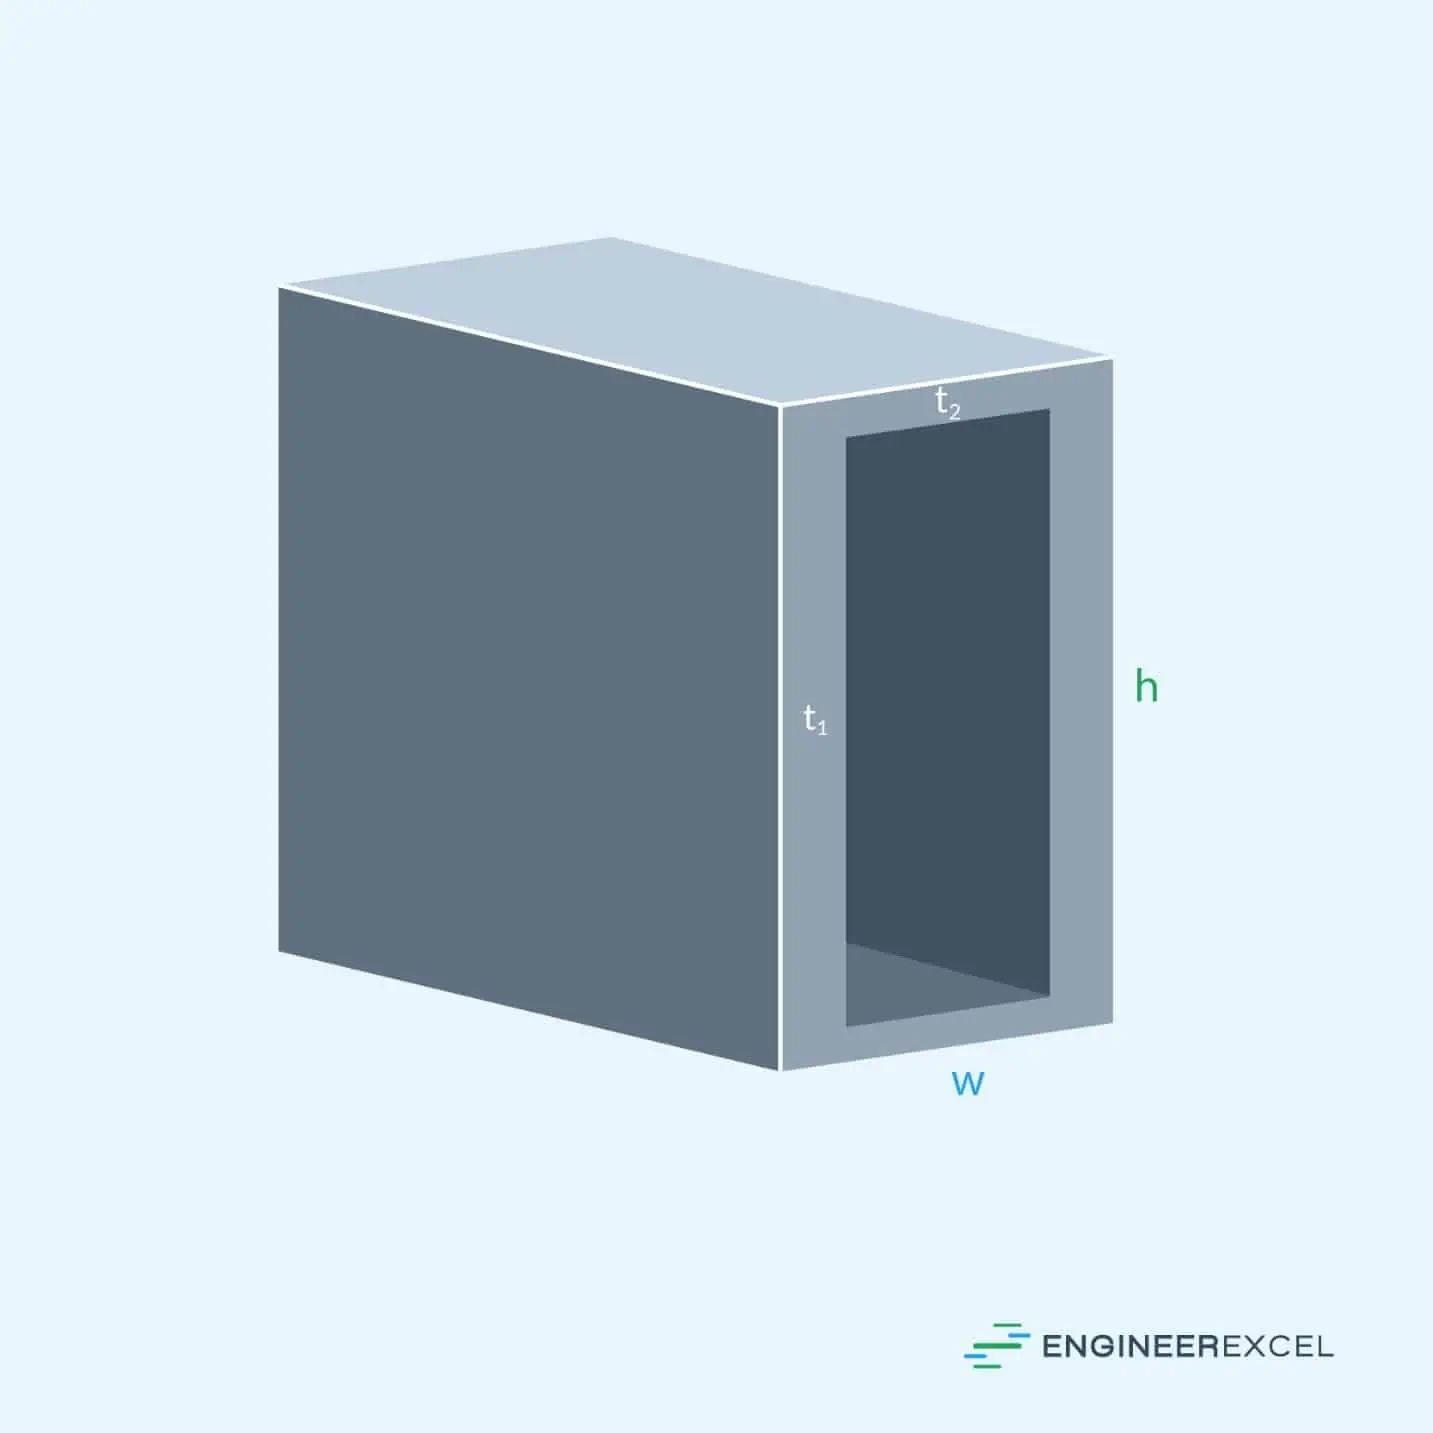 Moment Of Inertia For Rectangular Tube With Different Thickness